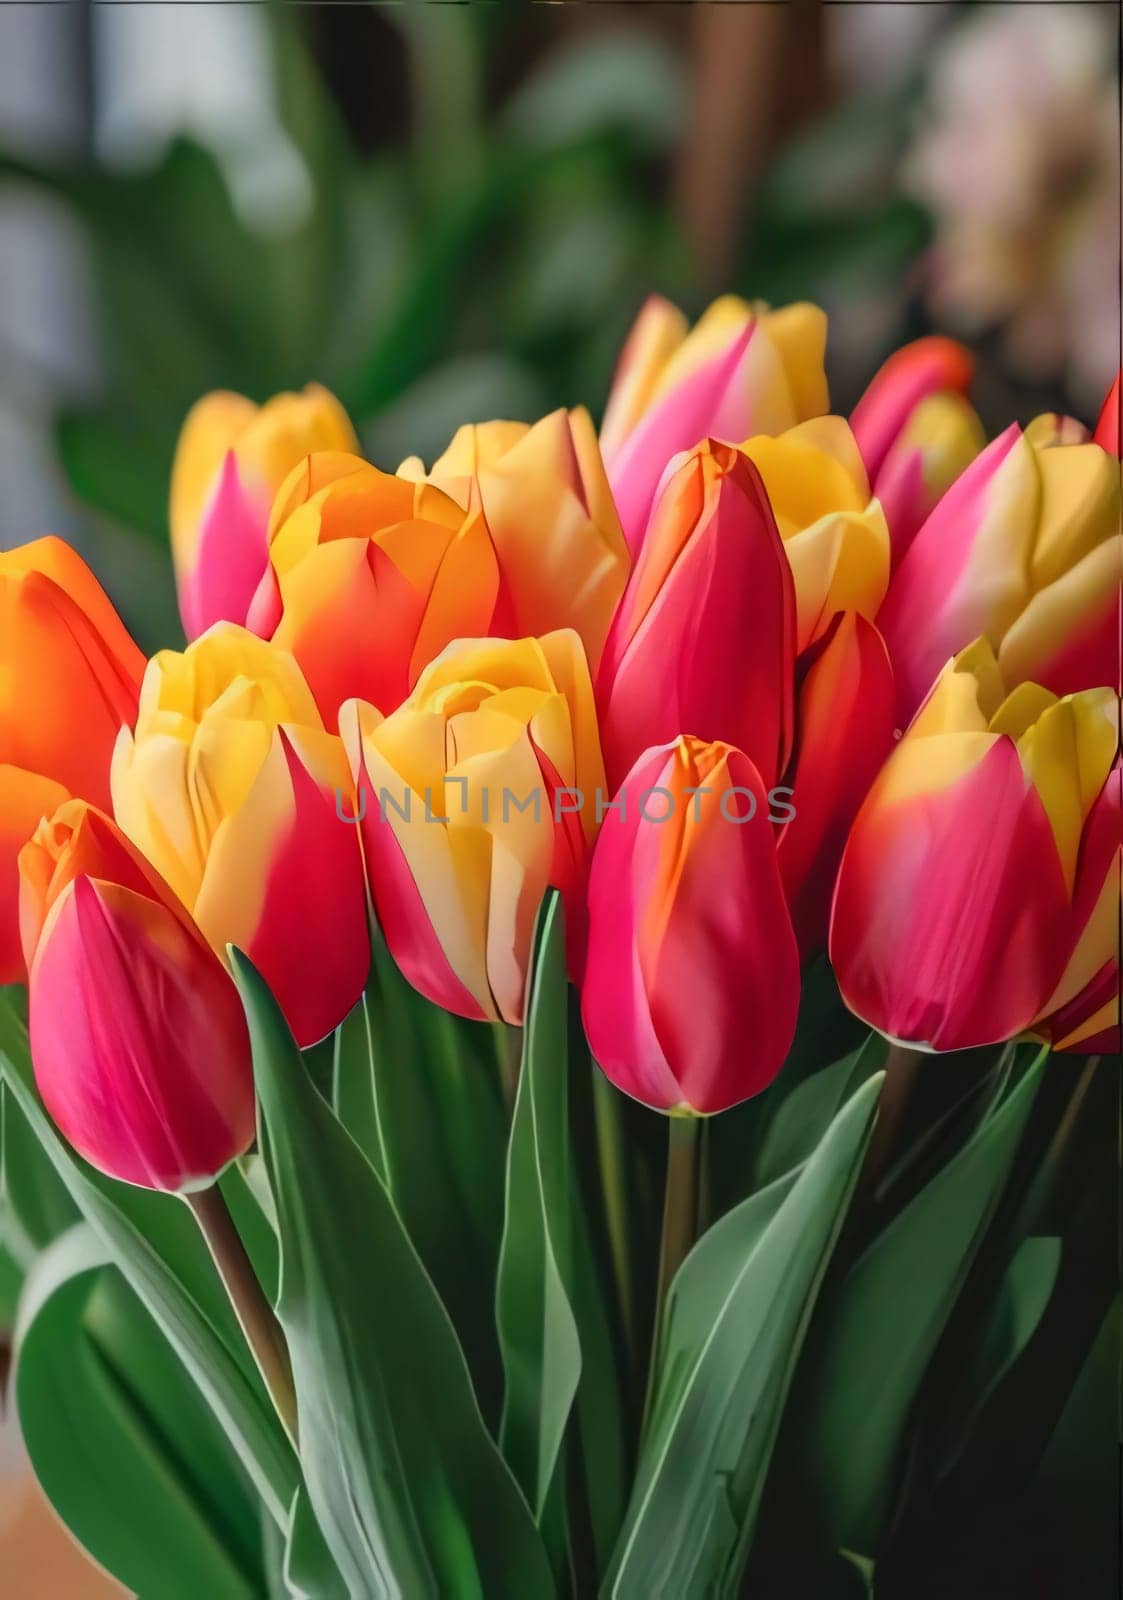 Red and orange Tulips with green leaves, smudged background, bouquet. Flowering flowers, a symbol of spring, new life. A joyful time of nature waking up to life.